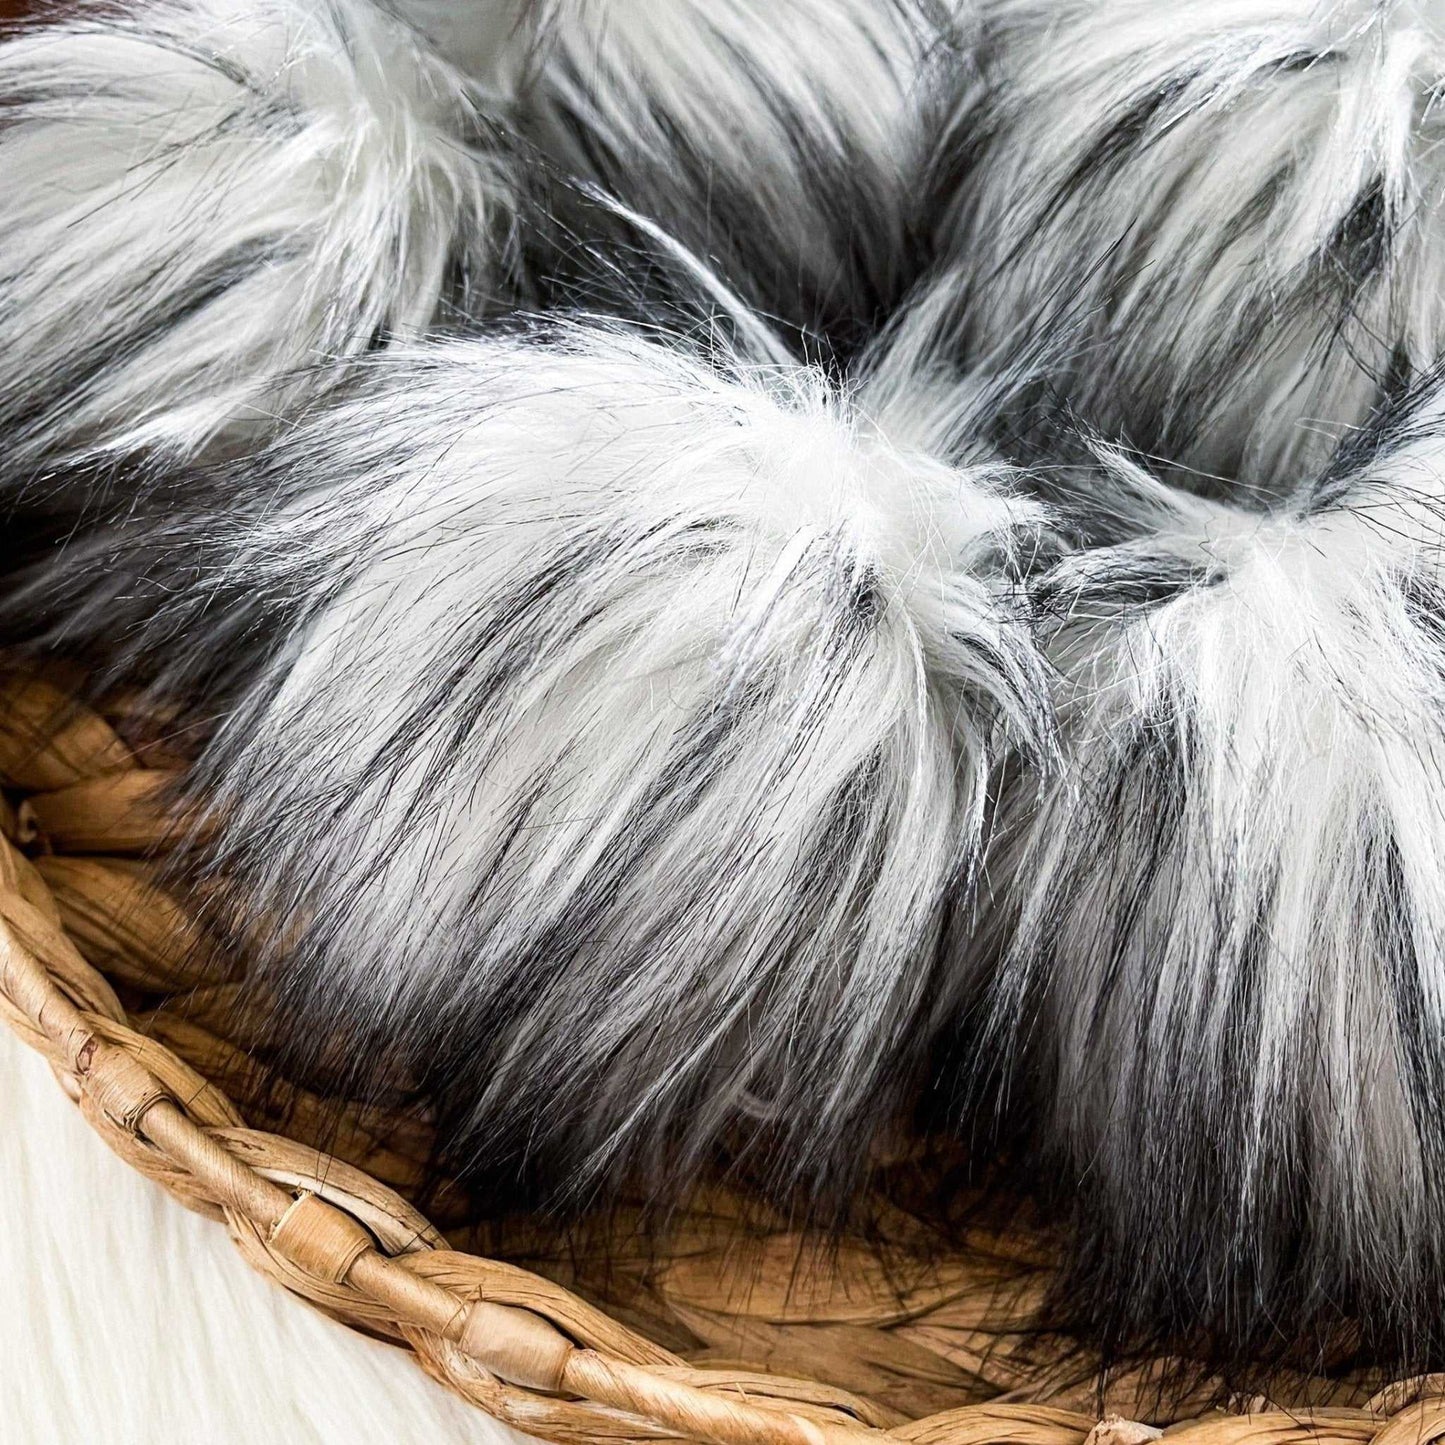 Wolf Faux Fur Fabric by the Yard or Meter | White and Black Pompom, Arts & Crafts, Decor, Costume Faux Fur Fabric 3 $ Buttons & Beans Co.